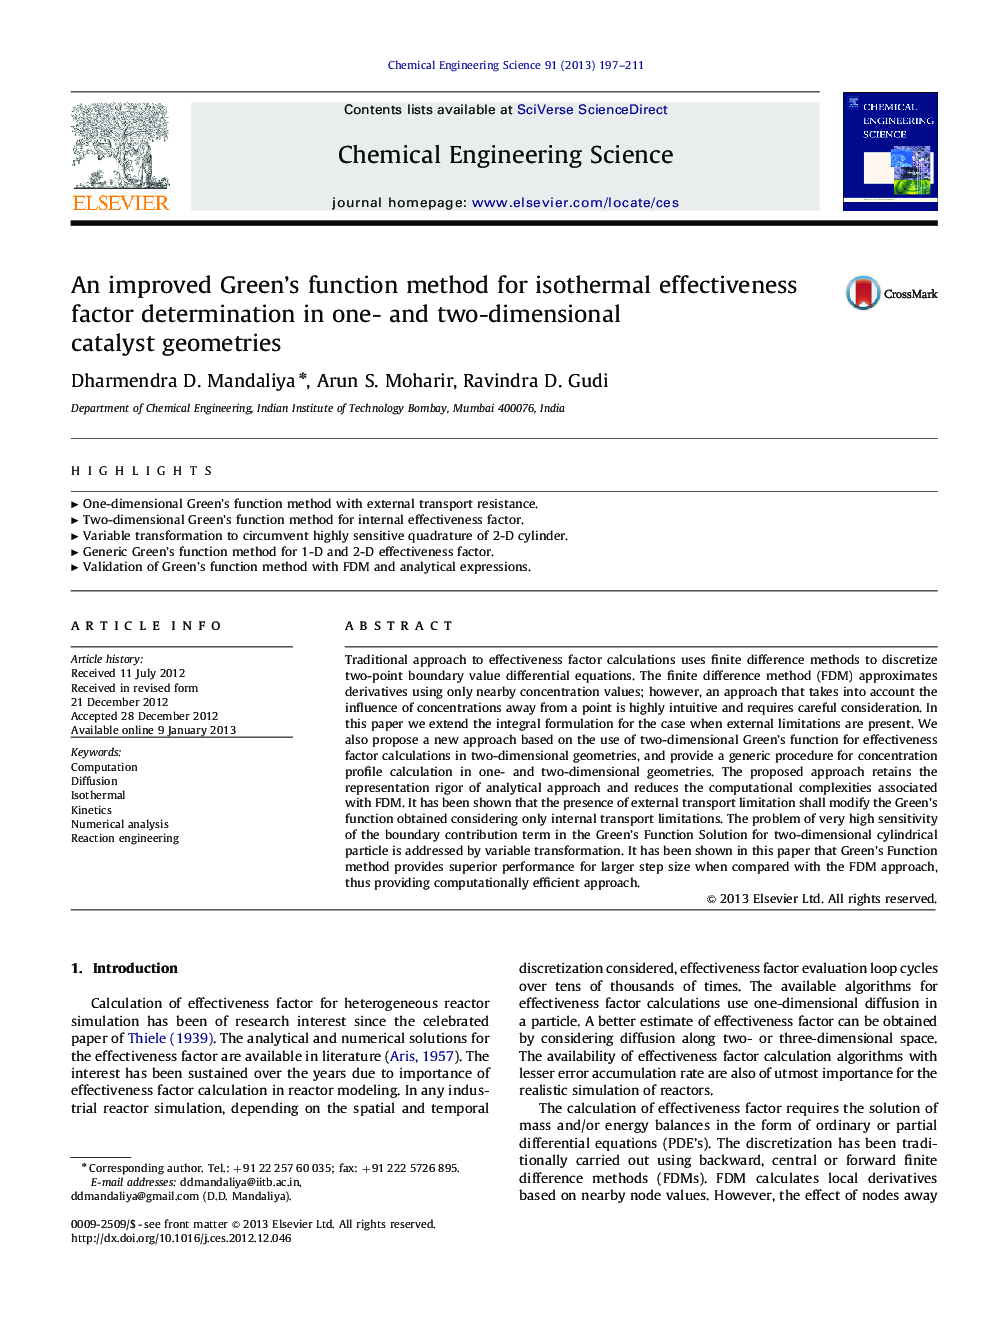 An improved Green's function method for isothermal effectiveness factor determination in one- and two-dimensional catalyst geometries